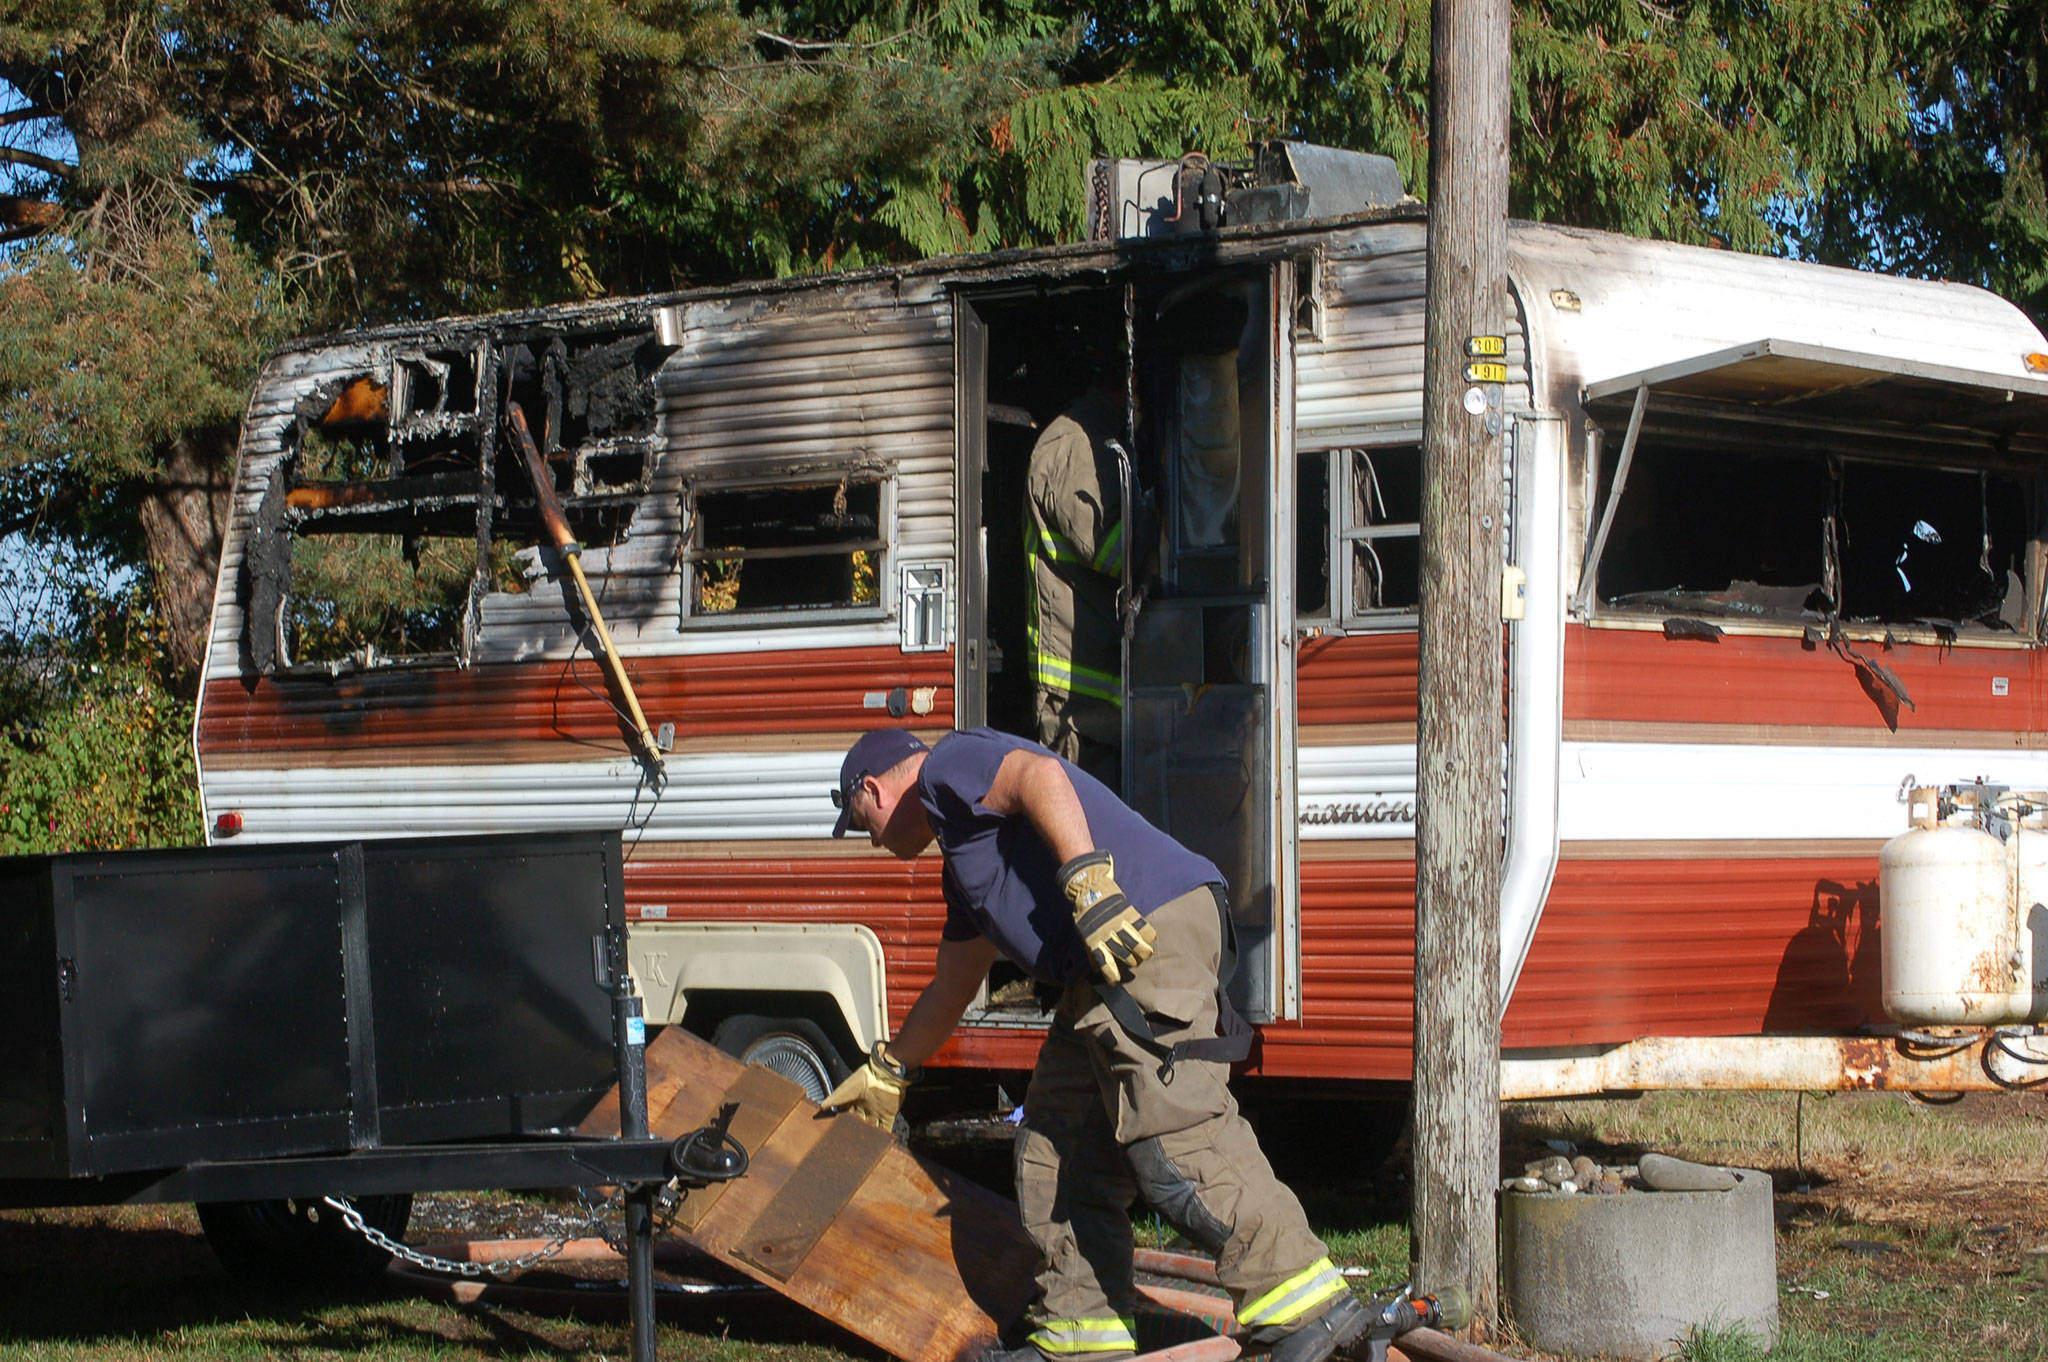 Firefighters from Clallam County Fire District 3 responded to a propane explosion at about 2:25 p.m. on Oct. 16 that caused a fire to ignite in an 18-foot travel trailer at the 800 block of West Hendrickson Road in Sequim. Sequim Gazette photo by Erin Hawkins